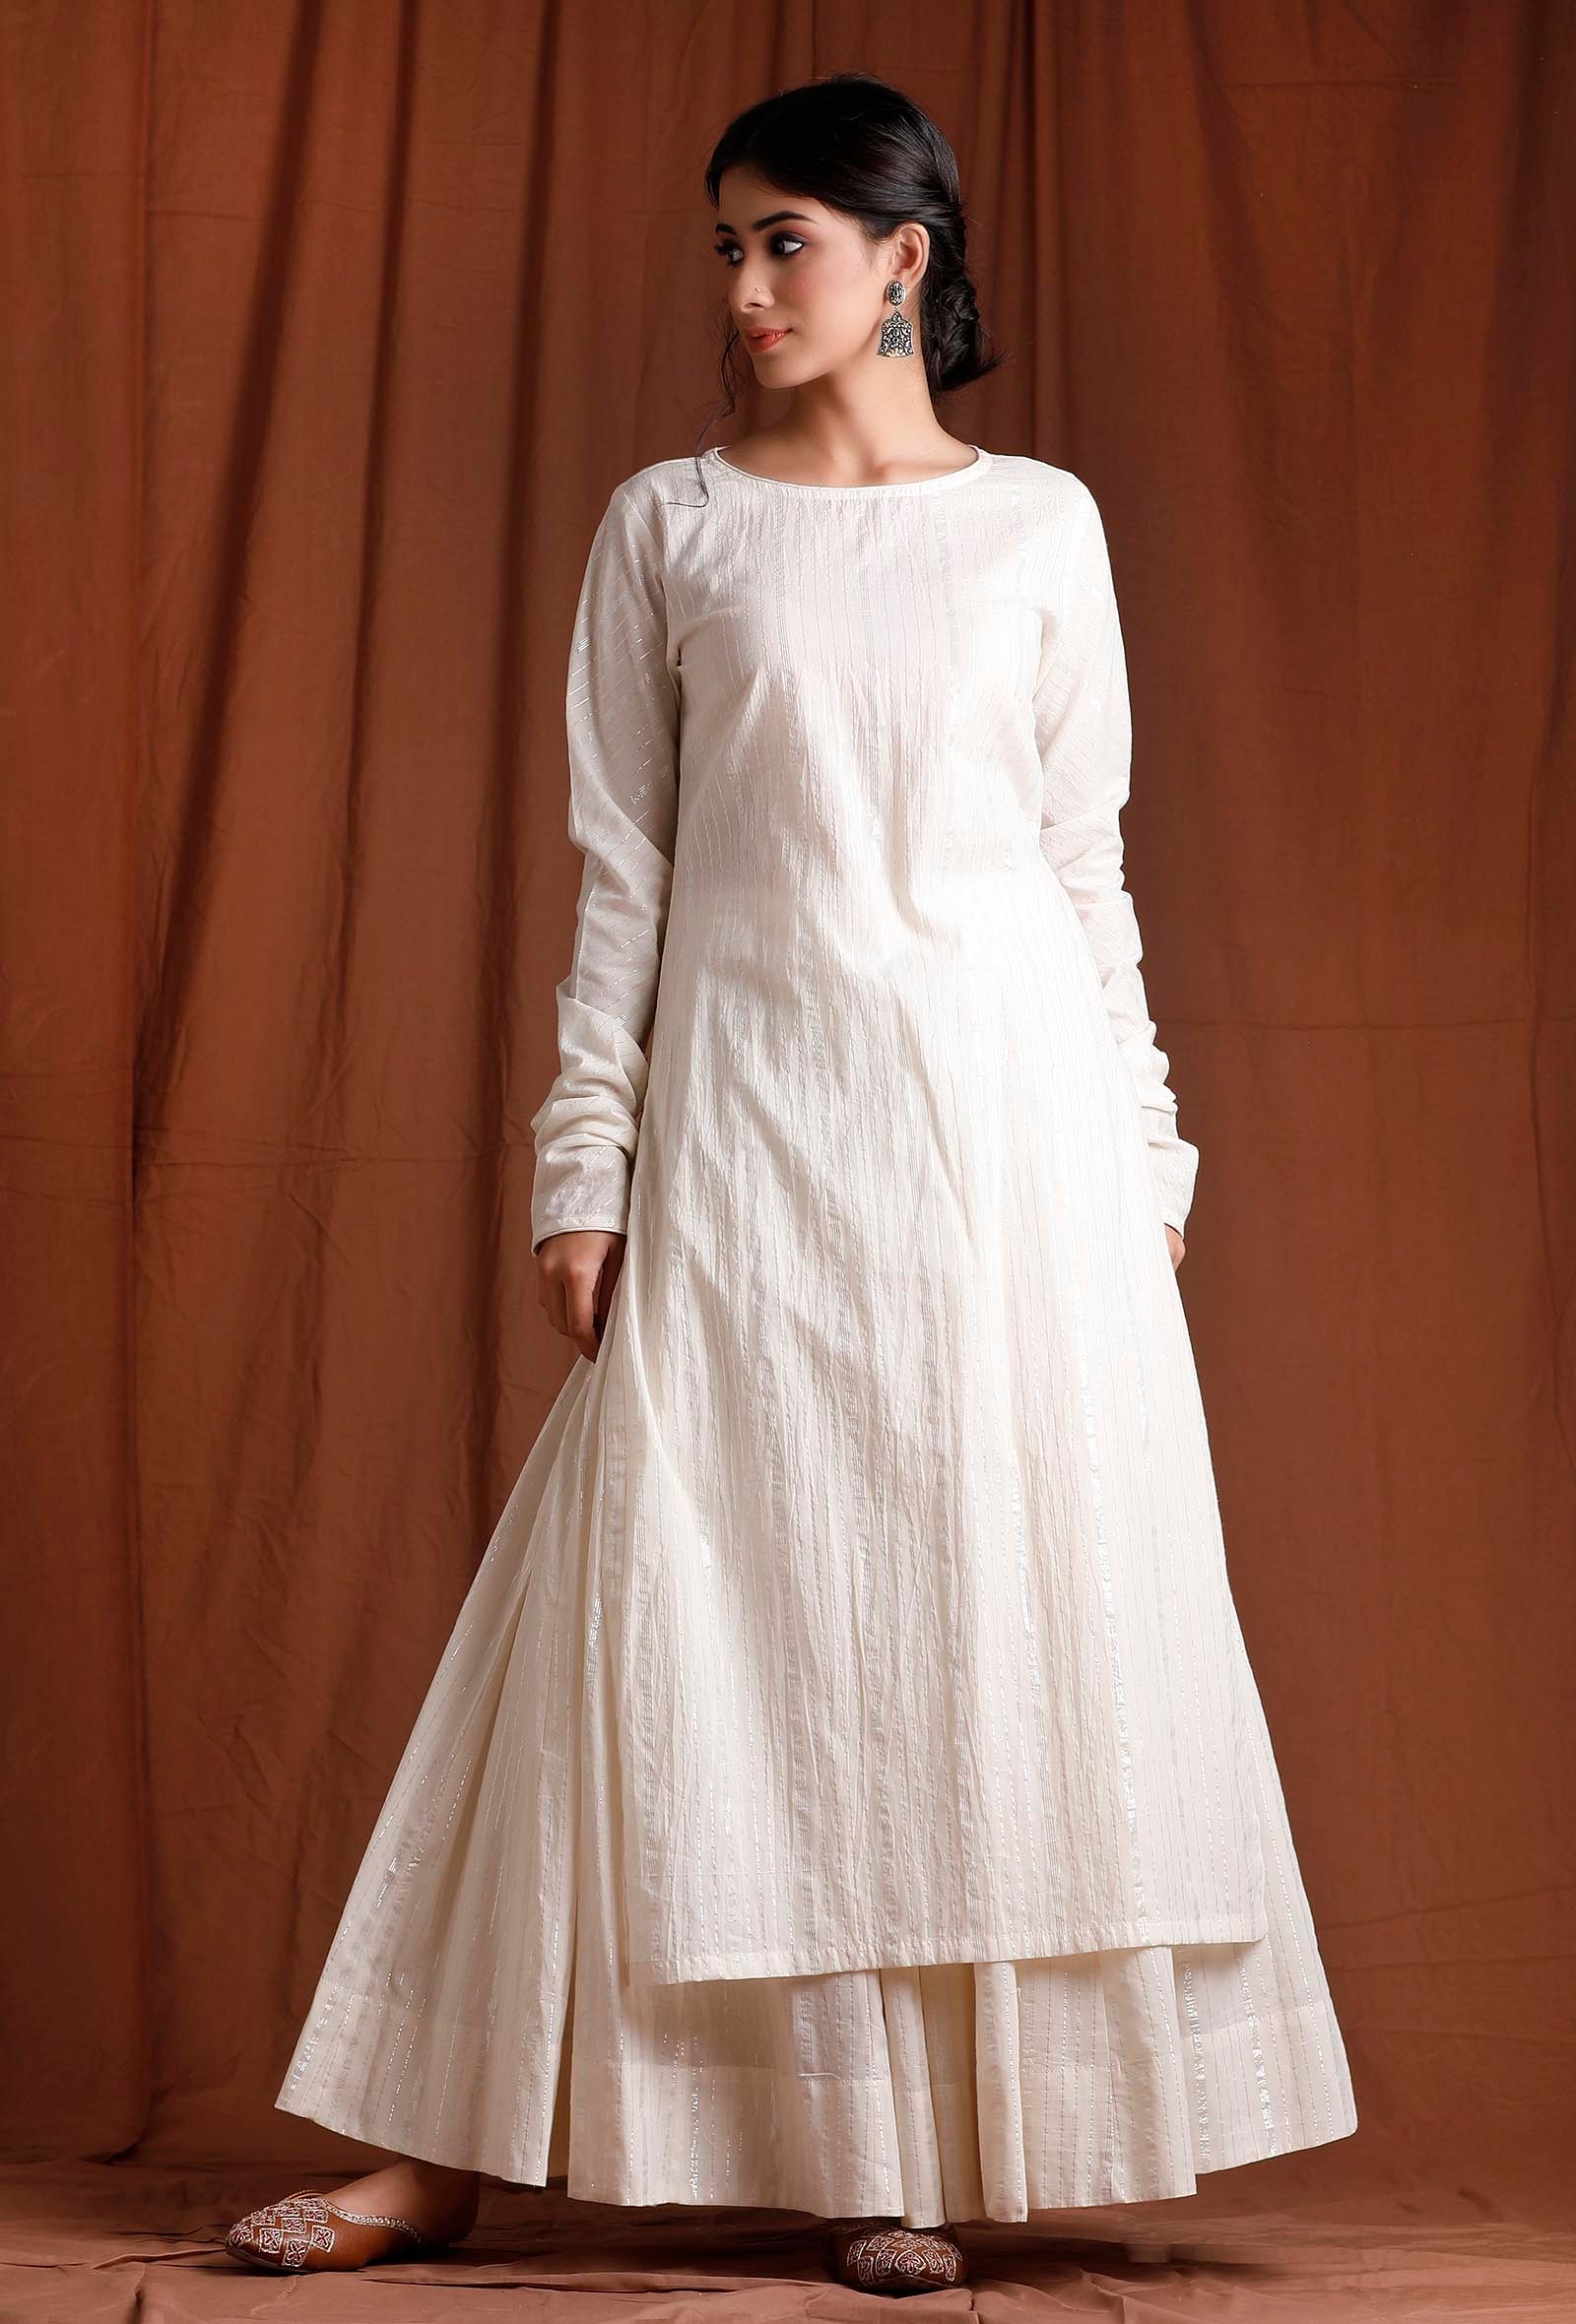 Shop Plain White Kurti for Women Online from India's Luxury Designers 2024